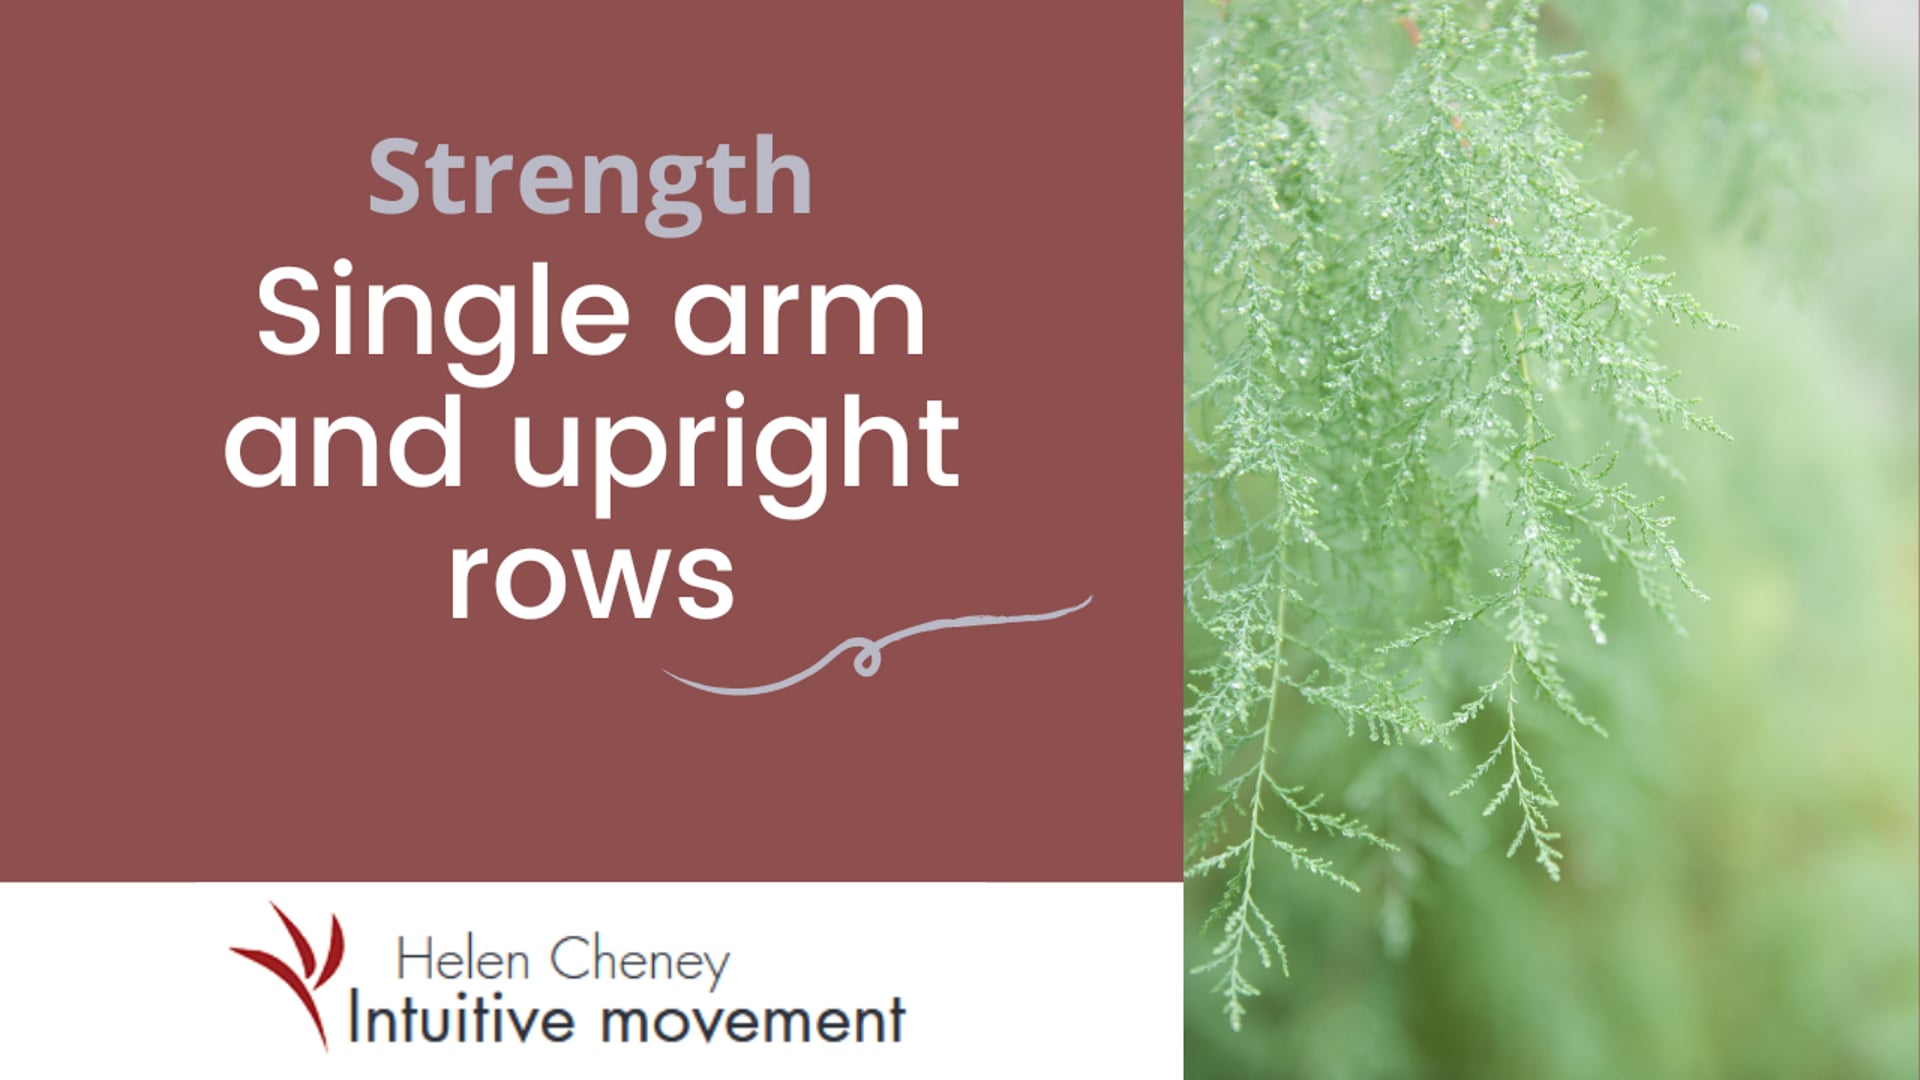 Single arm and upright rows